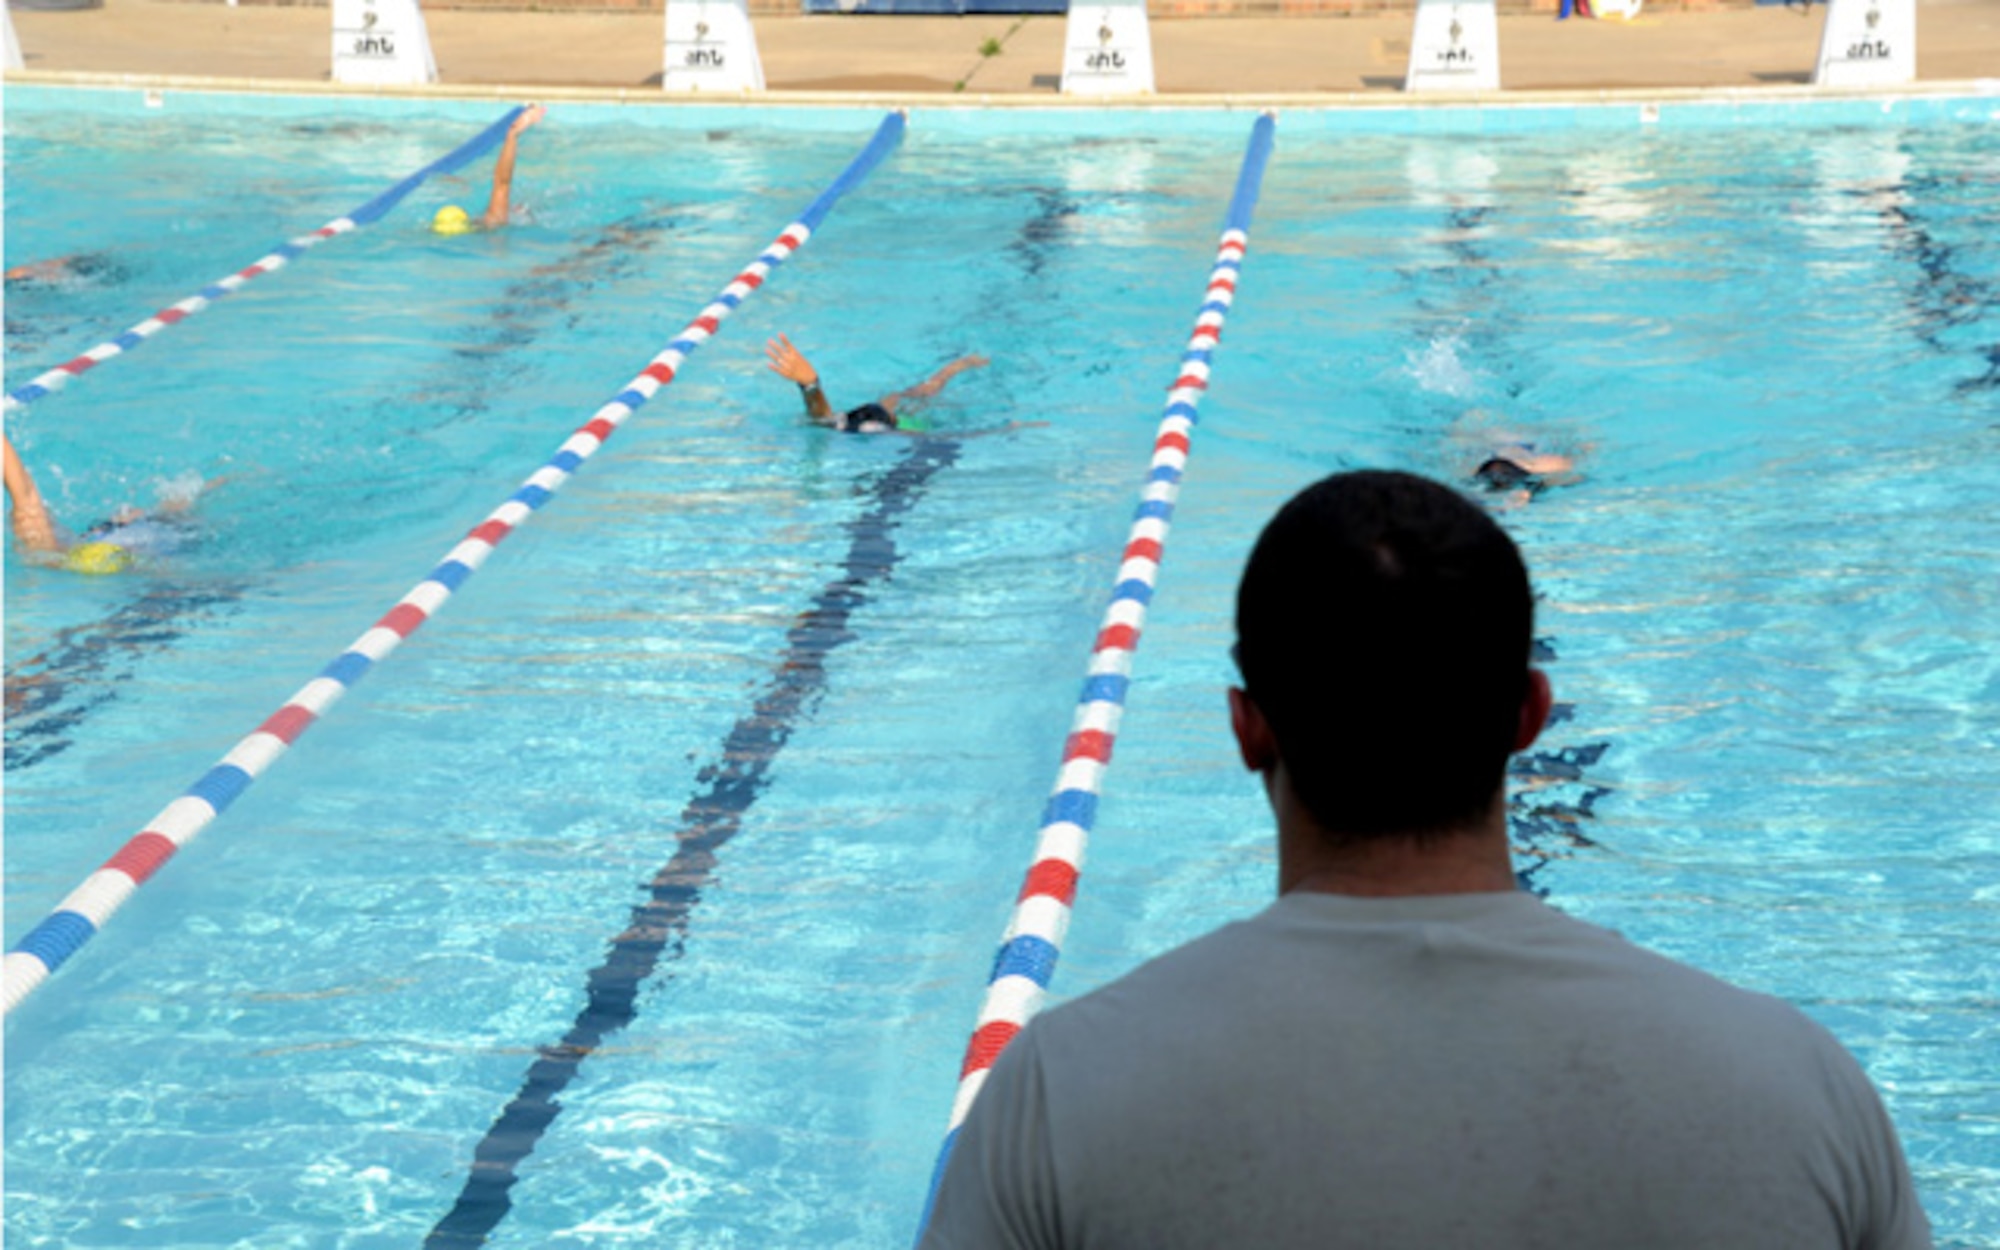 Airman 1st Class Lance Thornton watches his team swim laps at practice Aug. 30. After six months of volunteering with the Montgomery YMCA Barracudas, Thornton became the head coach for the entire program. In this role, Thornton leads the instruction of all of 130 six to 18 year-old swimmers.  (U.S. Air Force photo by Airman 1st Class William Blankenship)